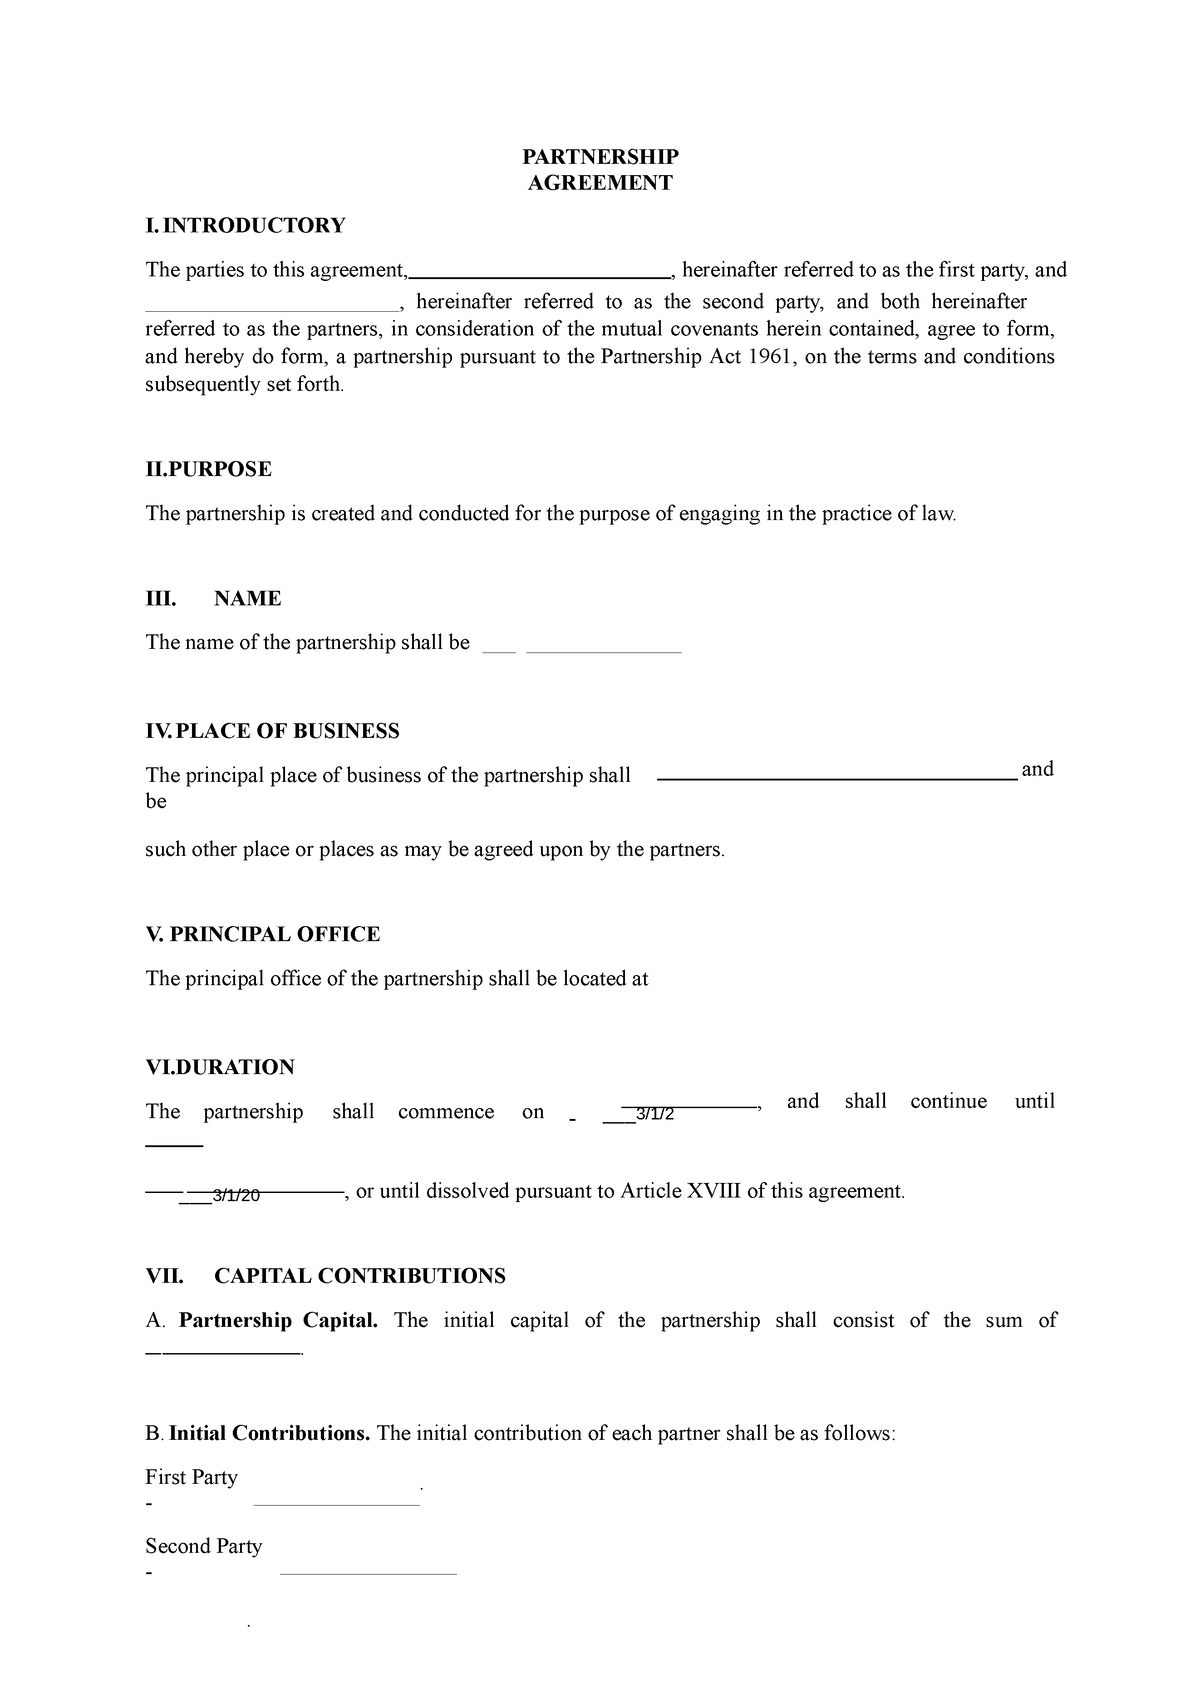 Partnership agreement form PARTNERSHIP AGREEMENT I. INTRODUCTORY The